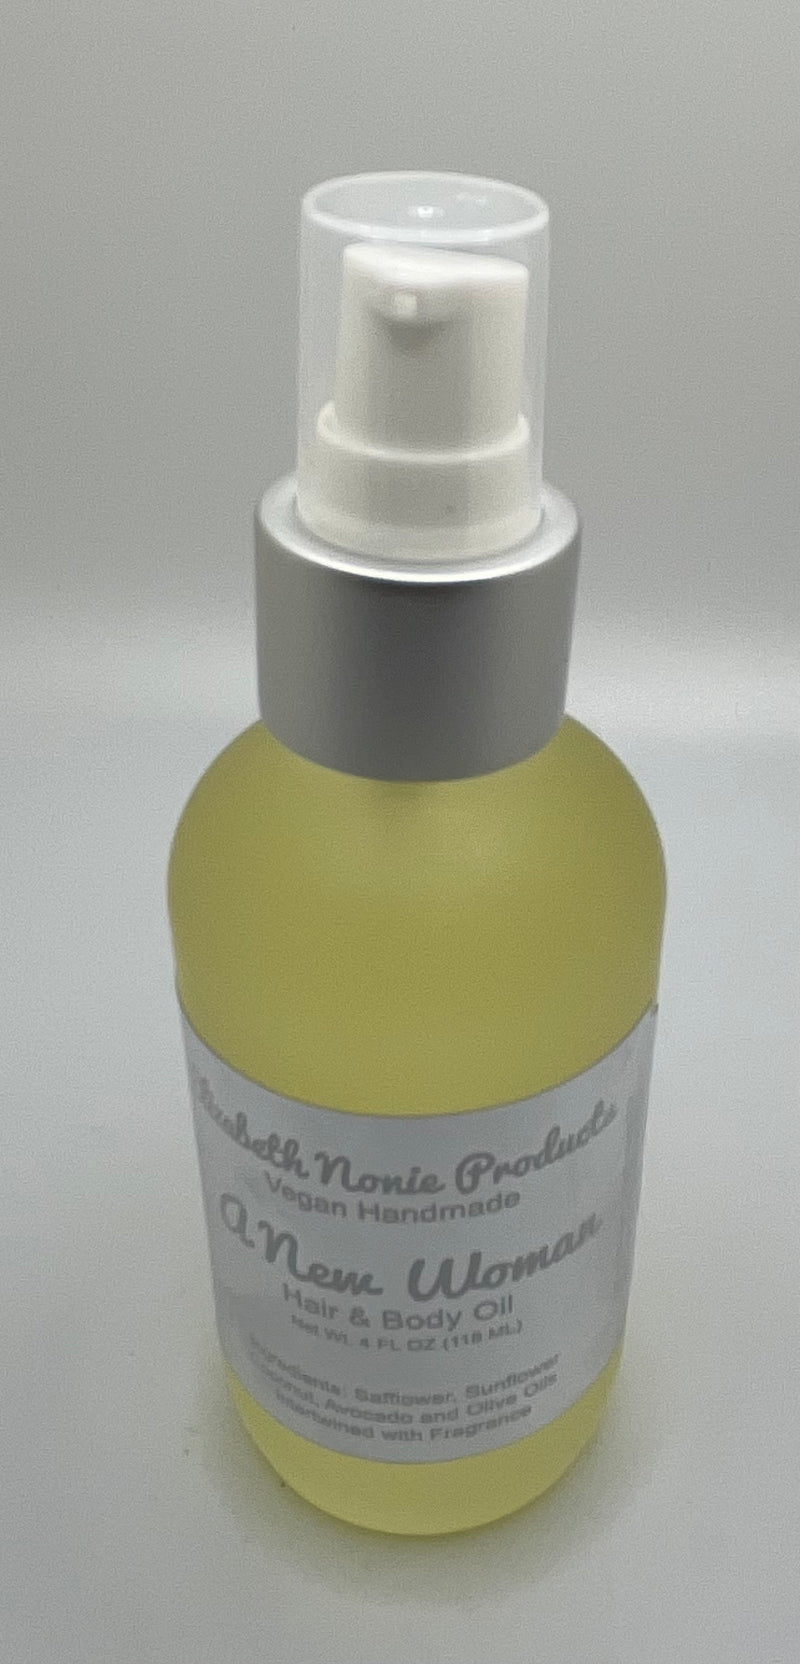 A New Woman Hair and Body Oil